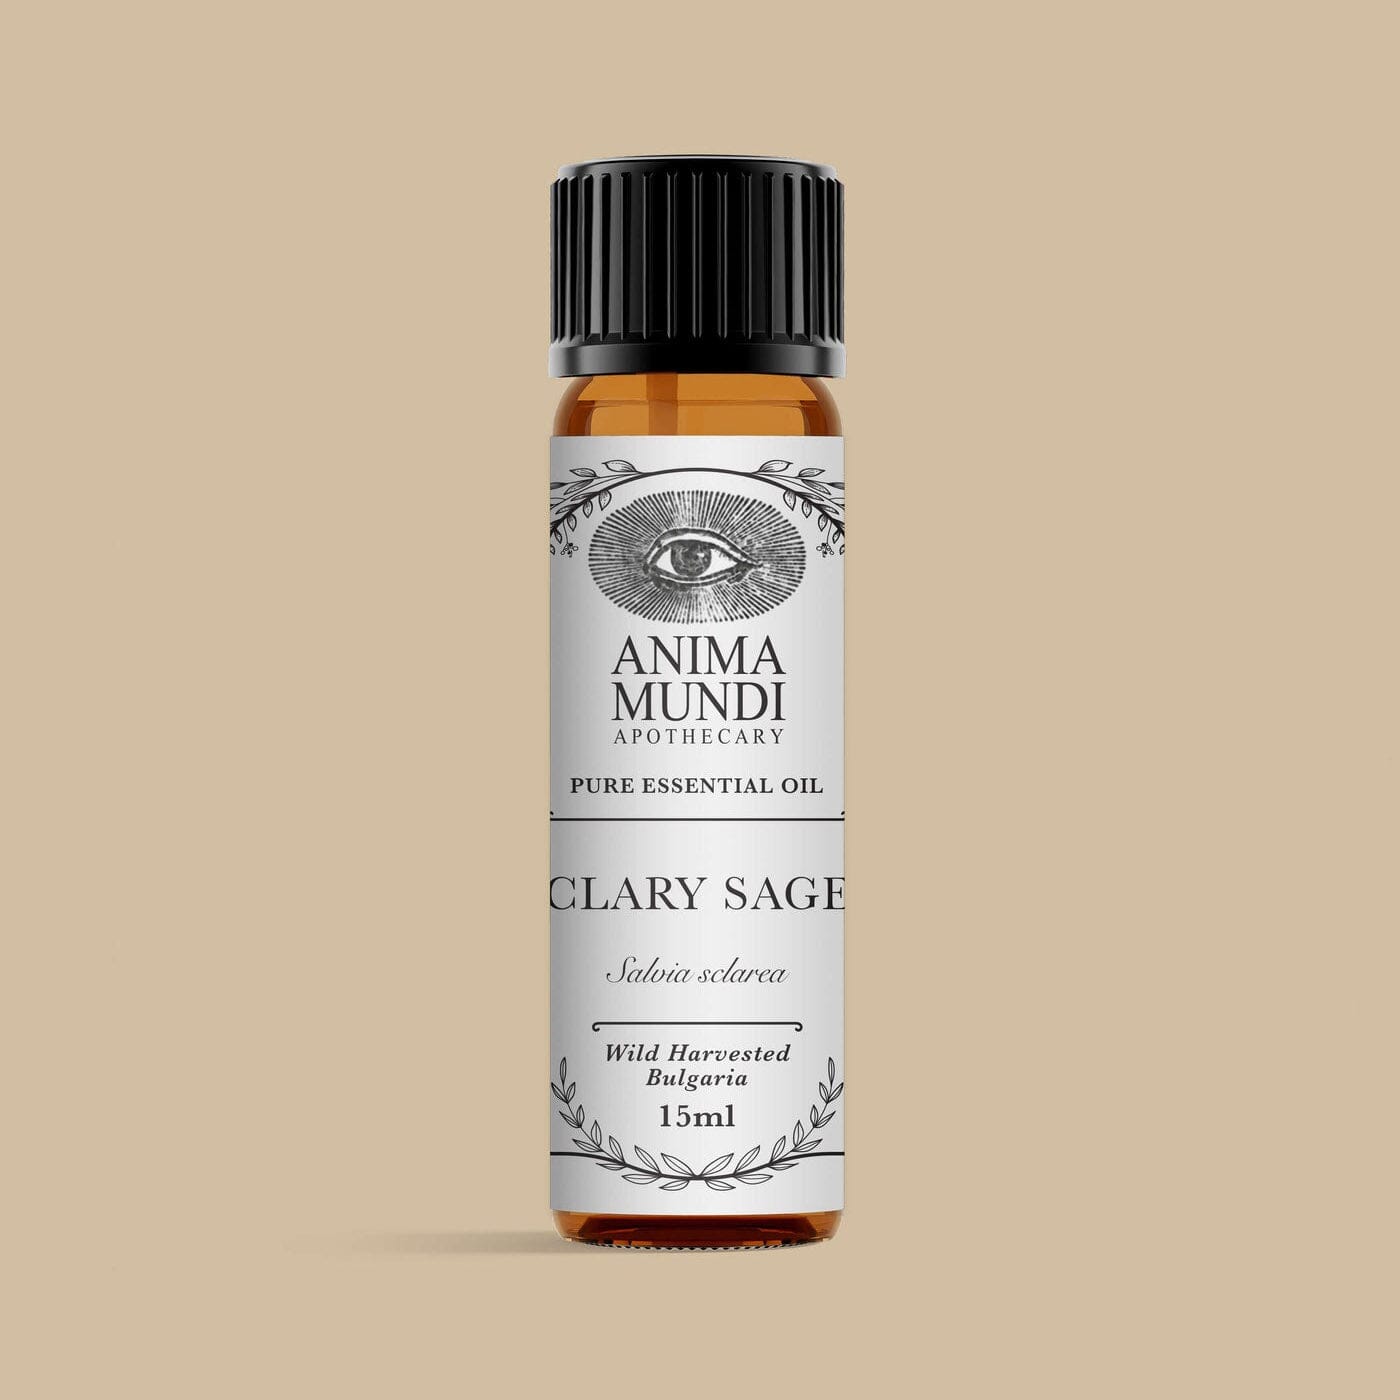 CLARY SAGE Essential Oil | Sustainably Cultivated Ätherische Öle Anima Mundi Apothecary - Genuine Selection